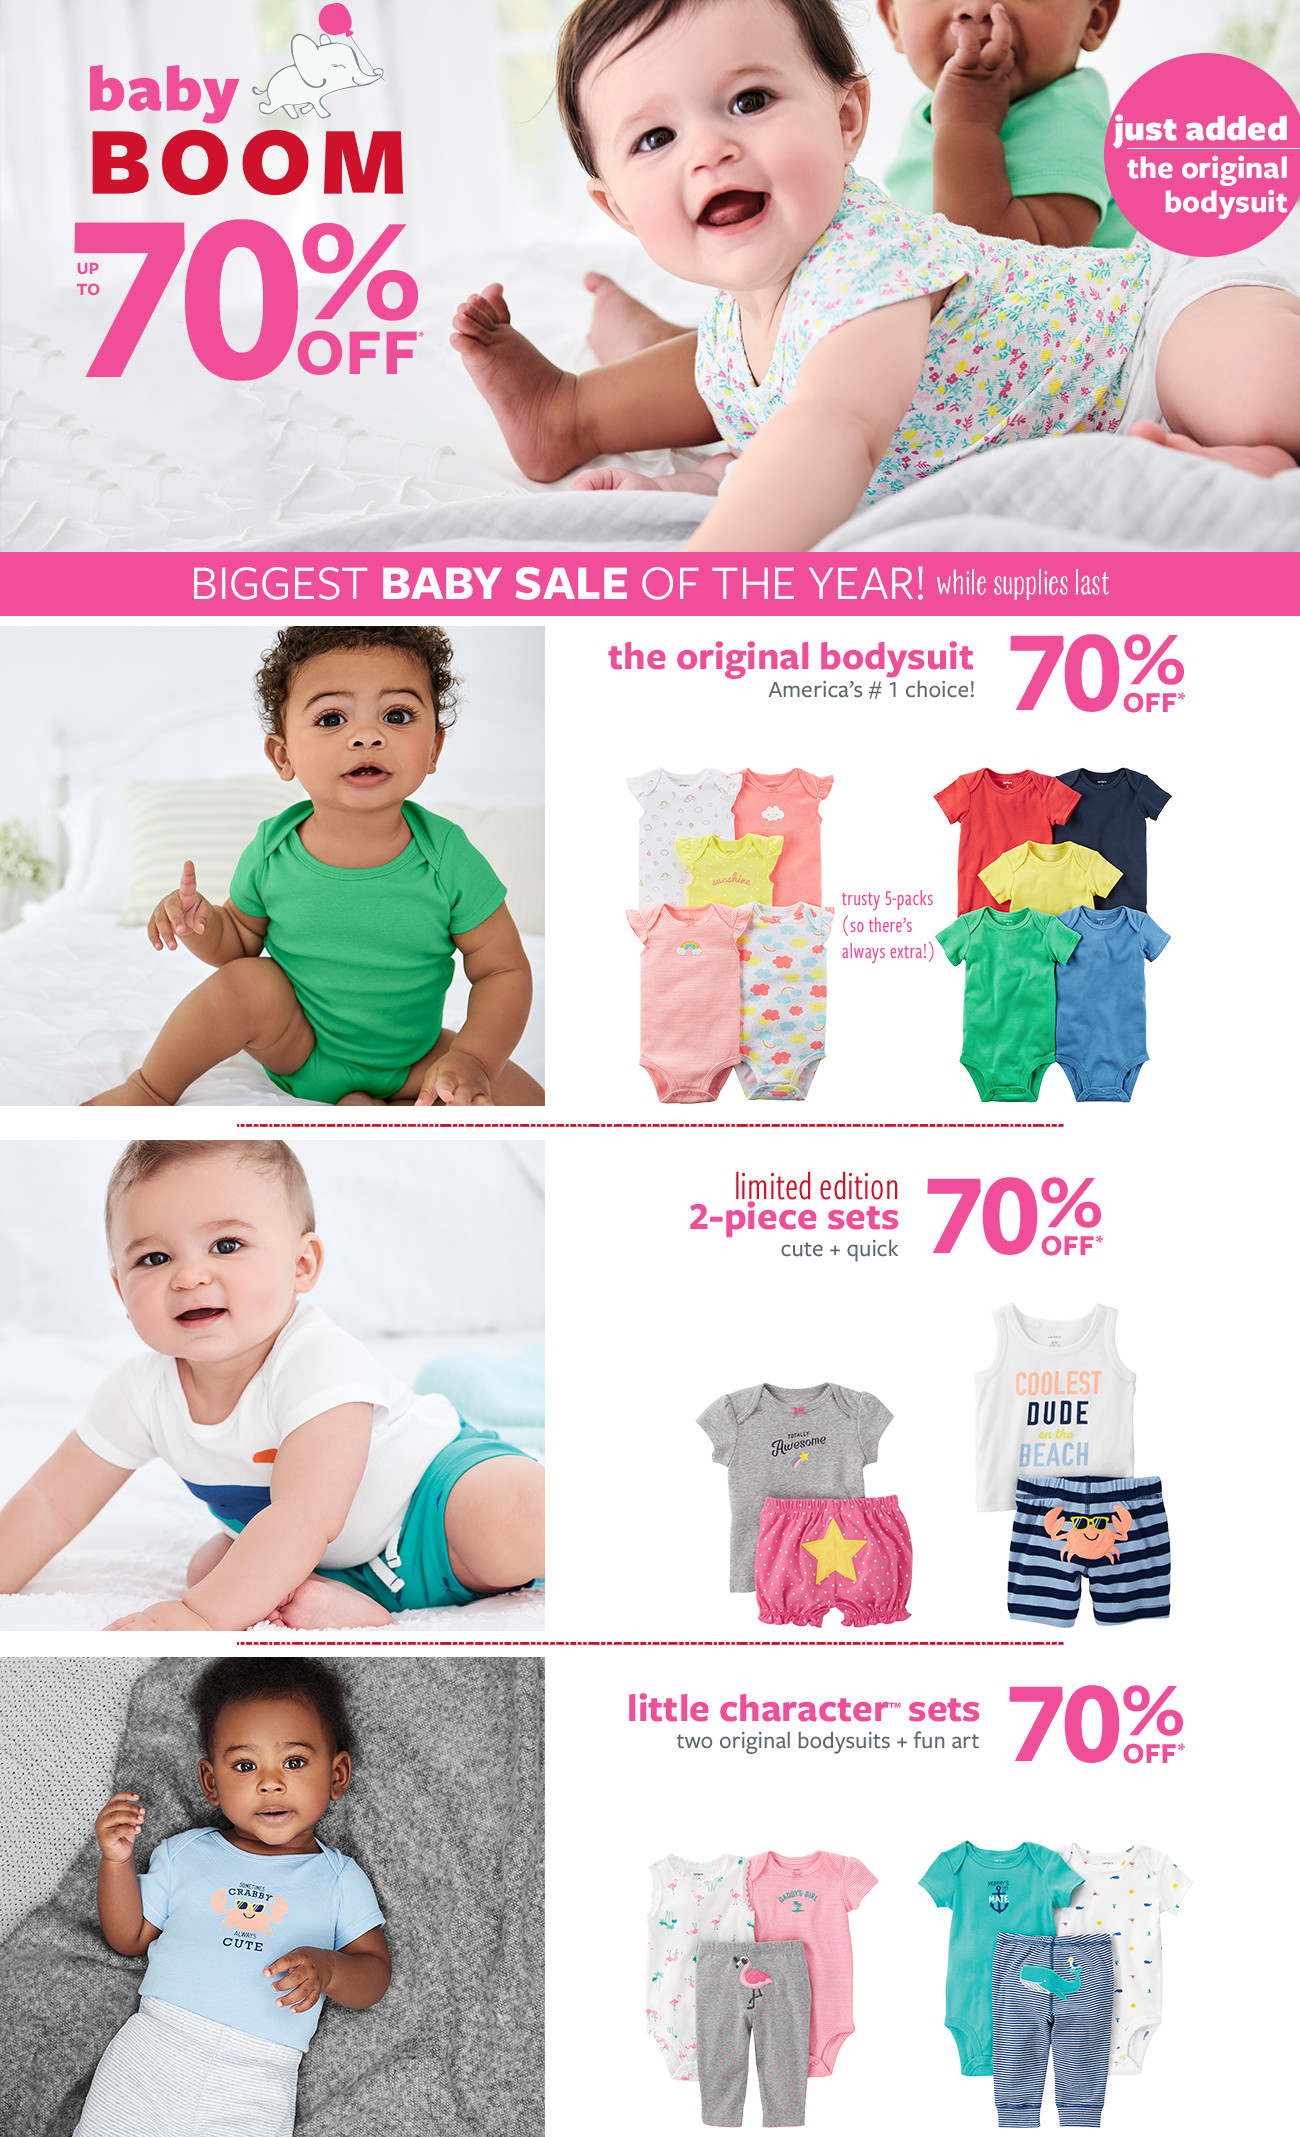 baby boom | up to 70% off msrp | biggest baby sale of the year! while supplies last